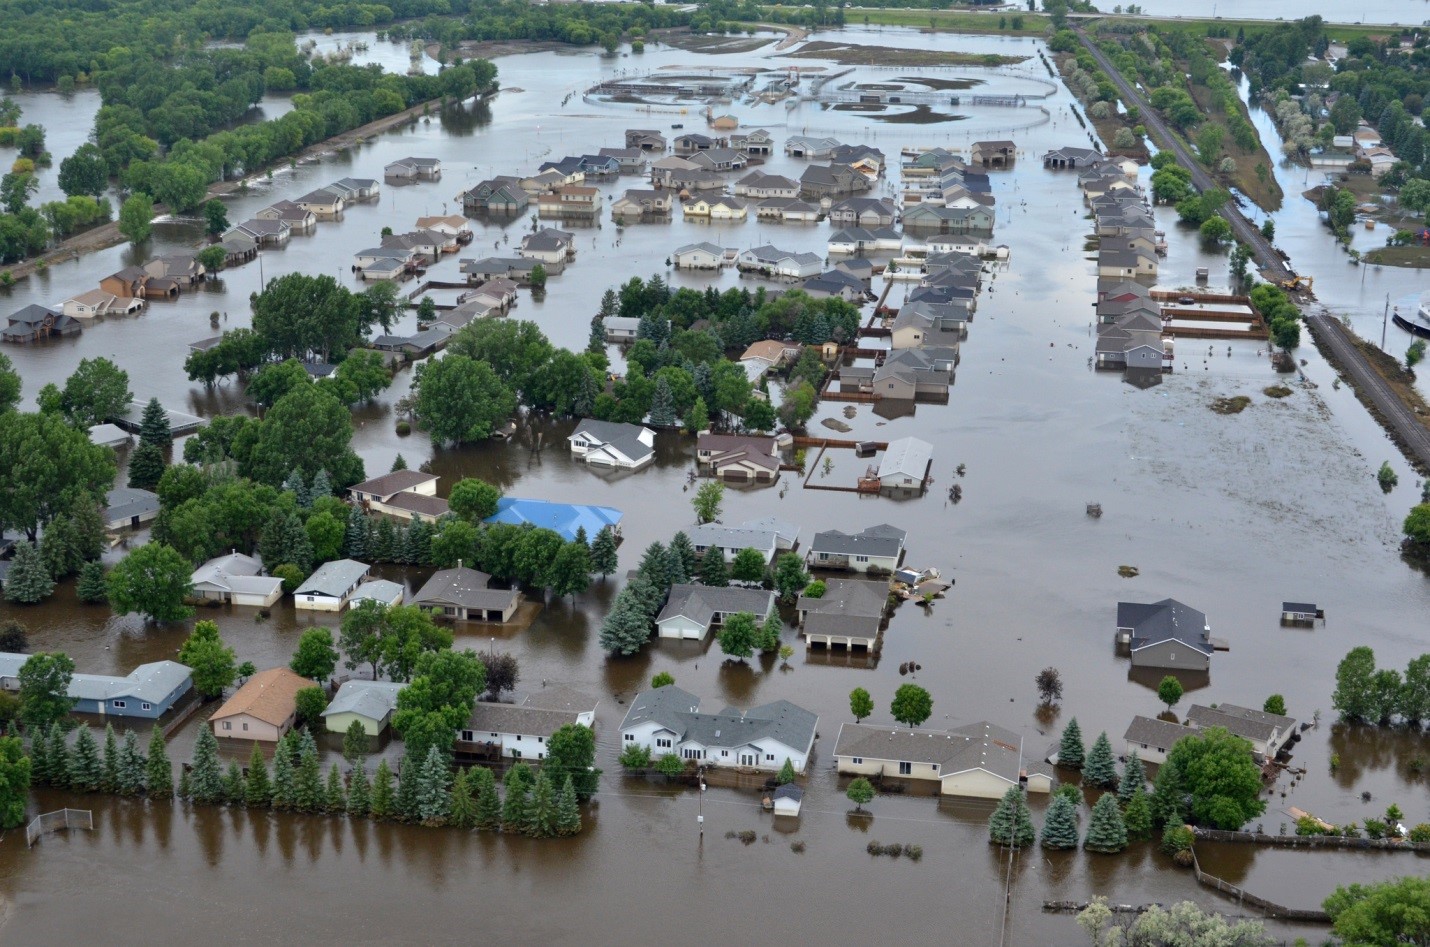 A view of Minot, North Dakota, in the midst of the biggest flood on record in the Souris River, taken on July 6, 2011. Credit: FEMA